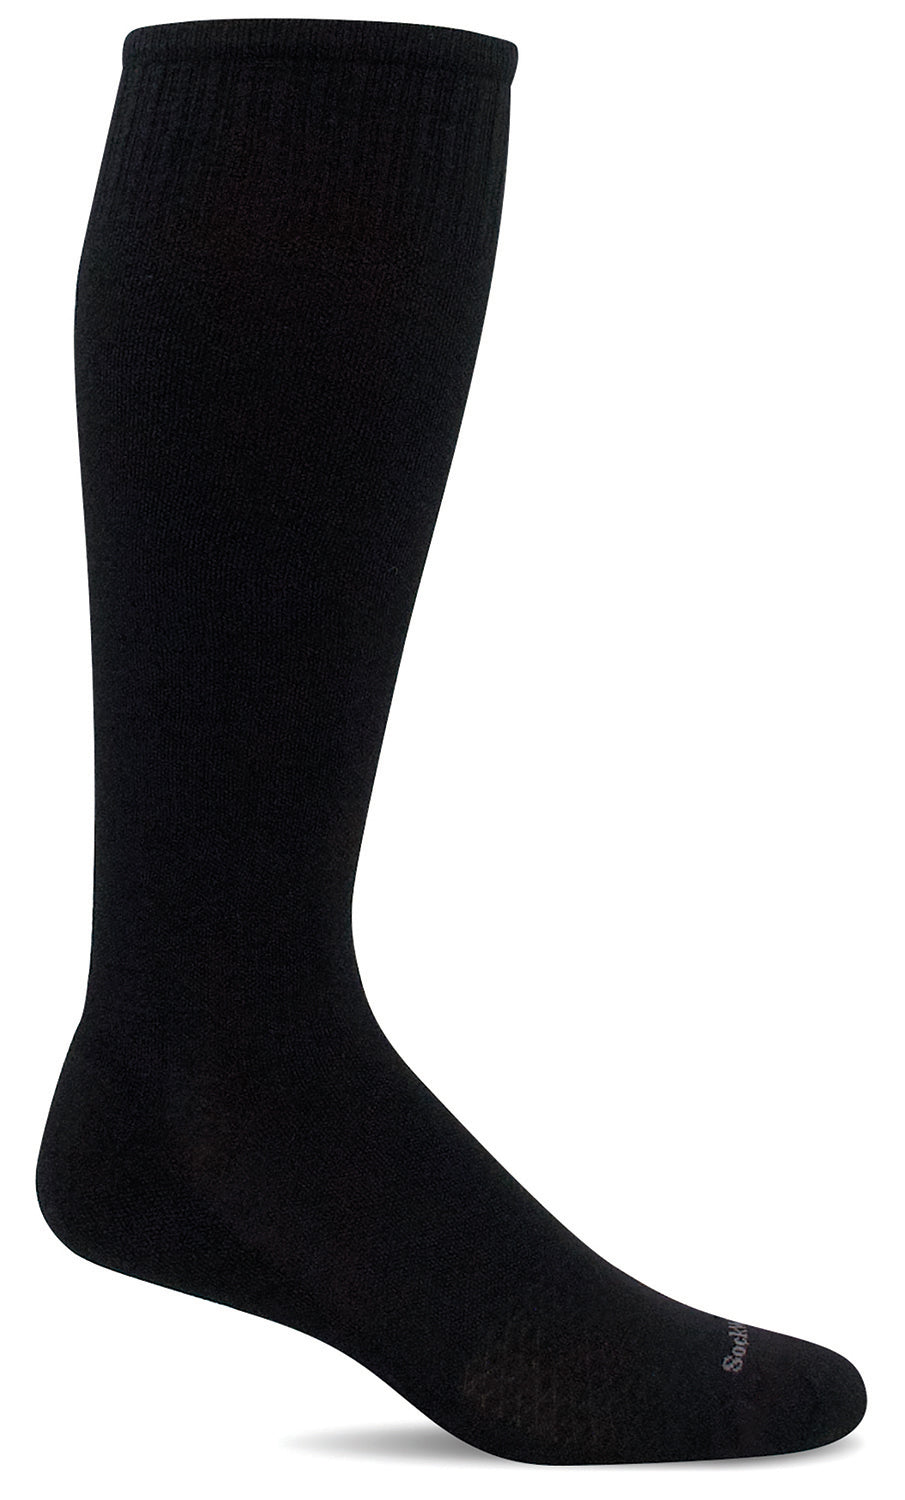 Featherweight Knee-High - Black Moderate Compression (15-20mmHg)